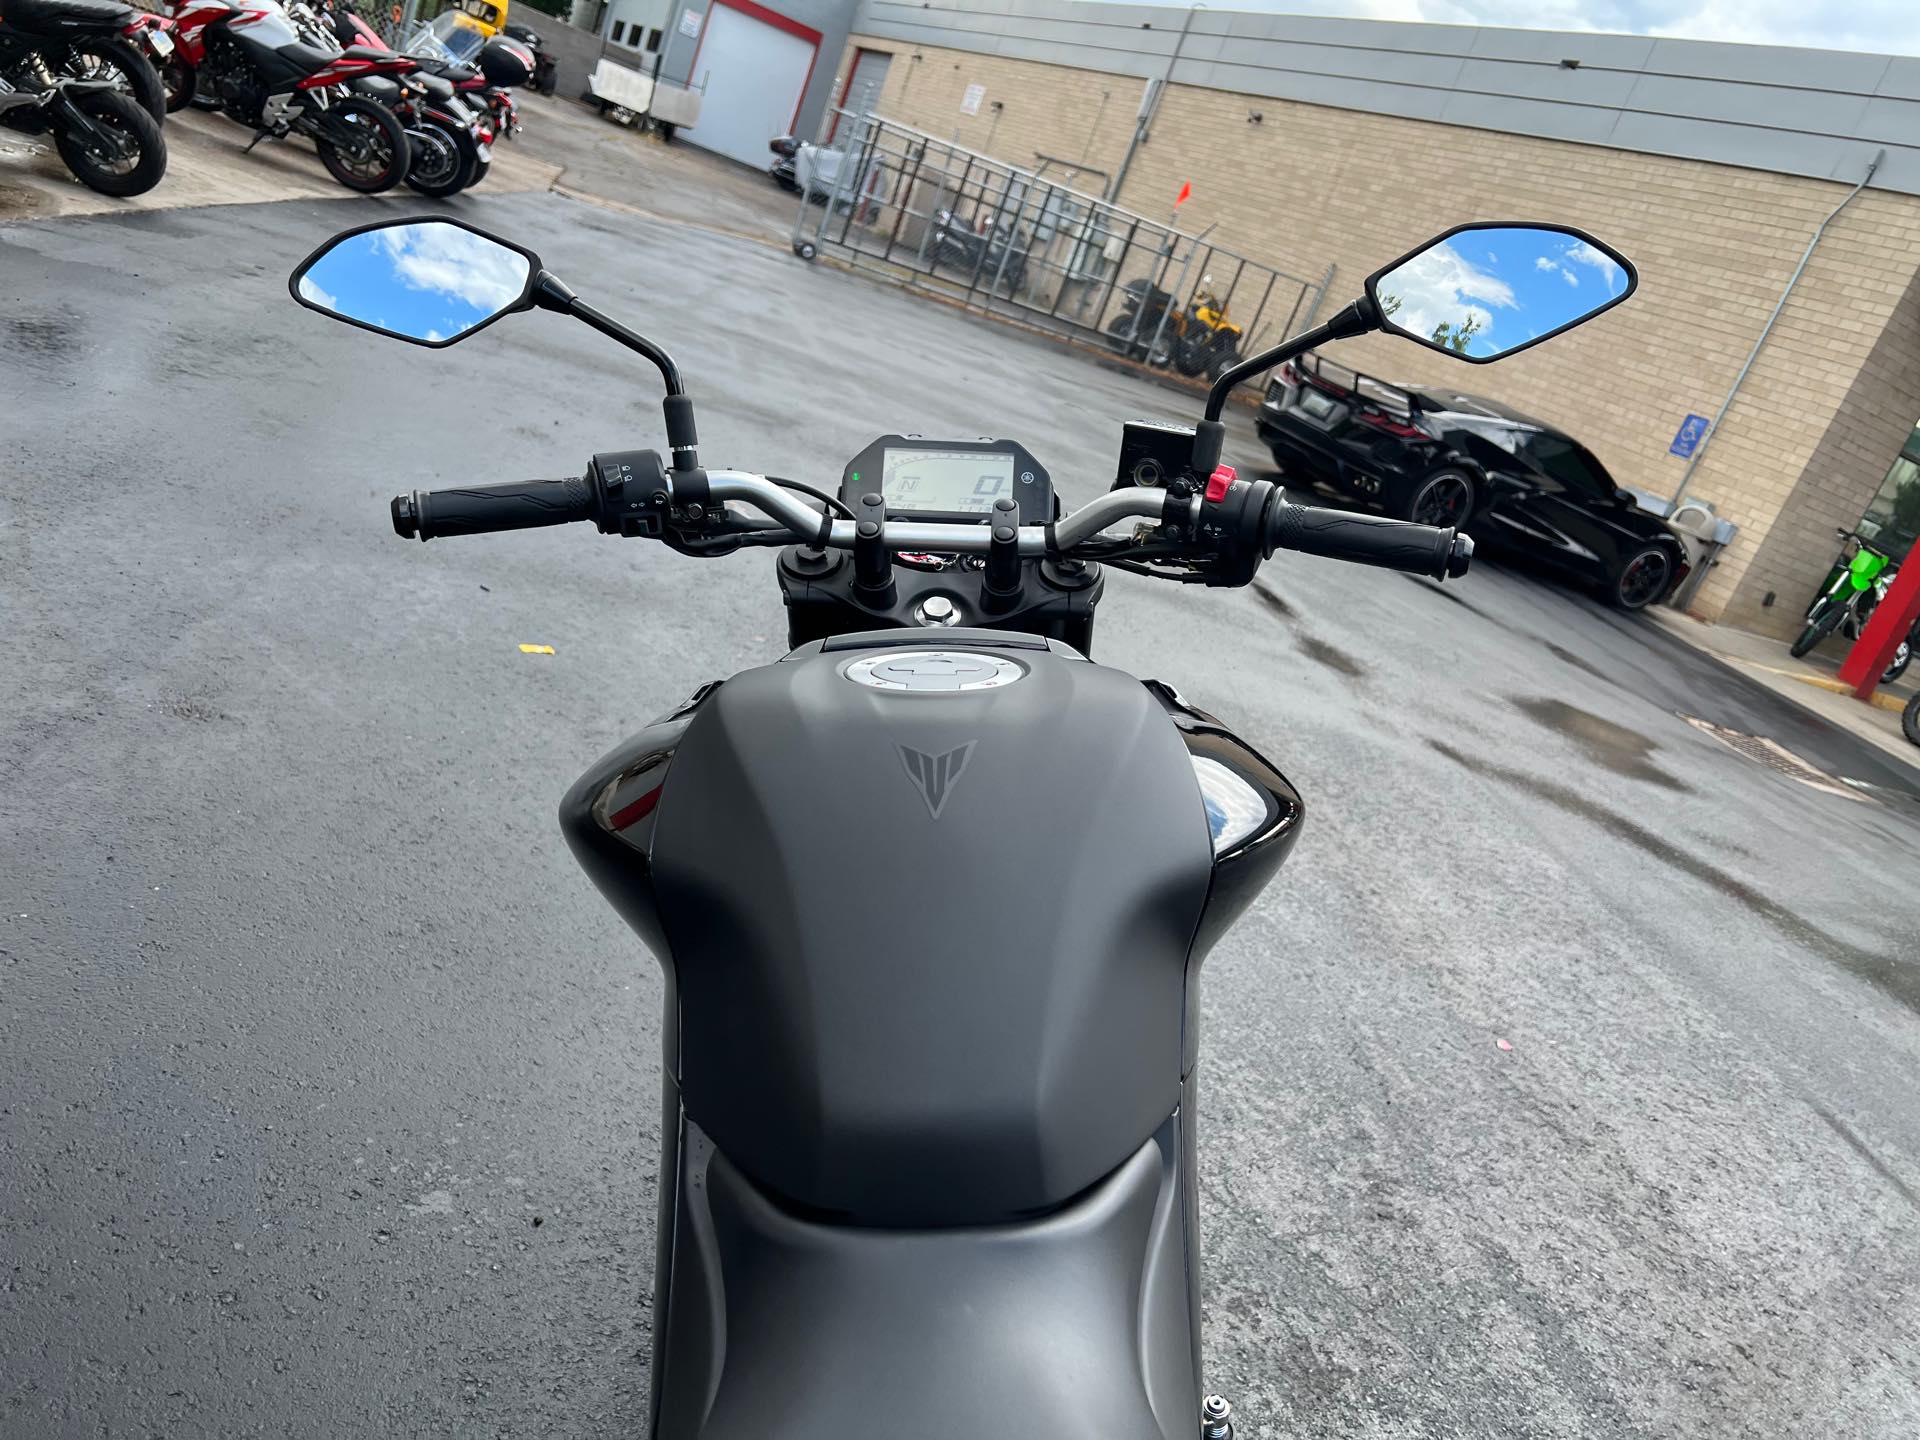 2020 Yamaha MT 03 at Aces Motorcycles - Fort Collins